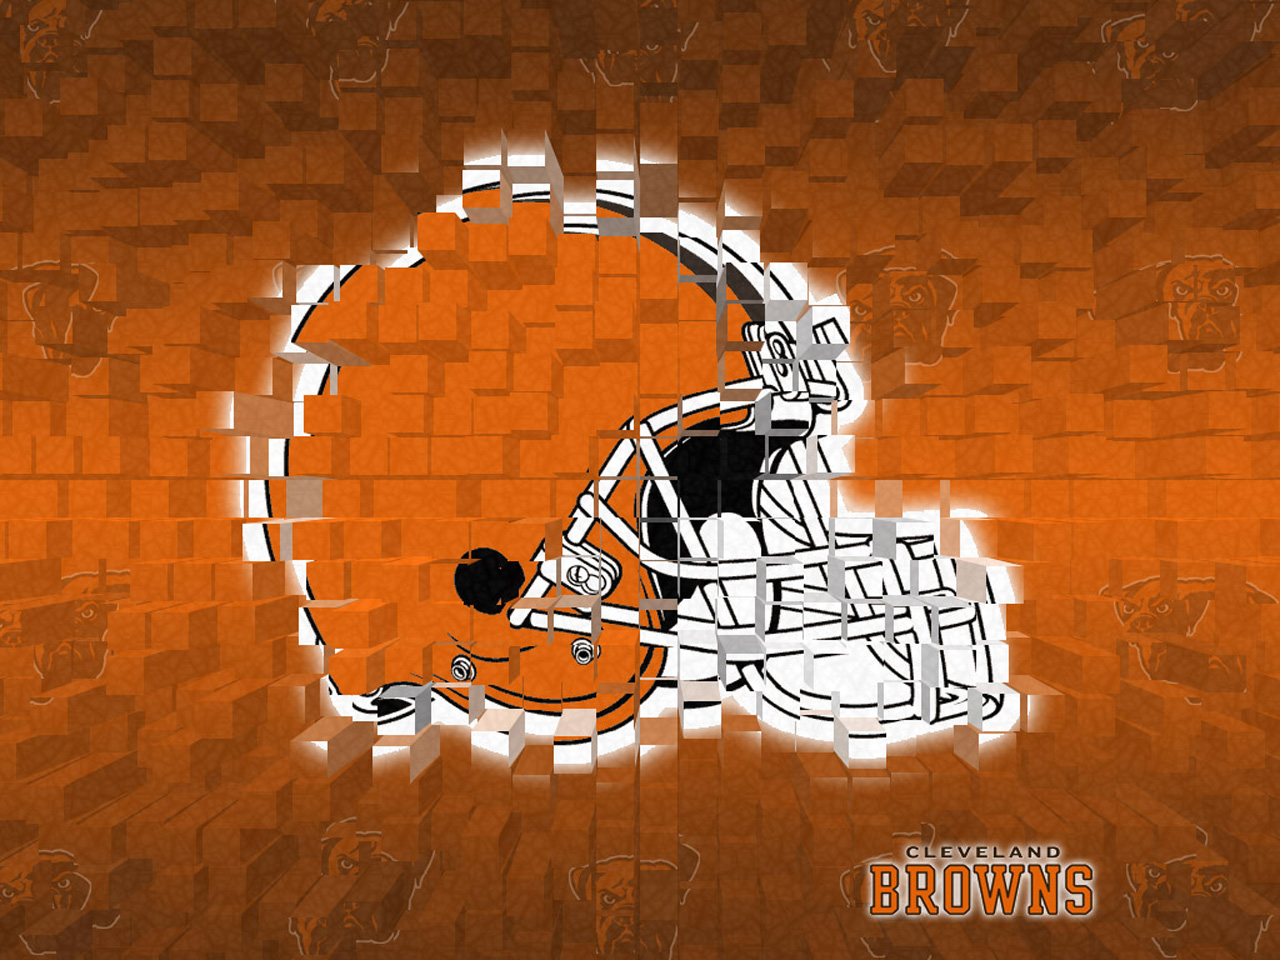 Cleveland Browns images Cleveland Browns Helmet HD 1280x960